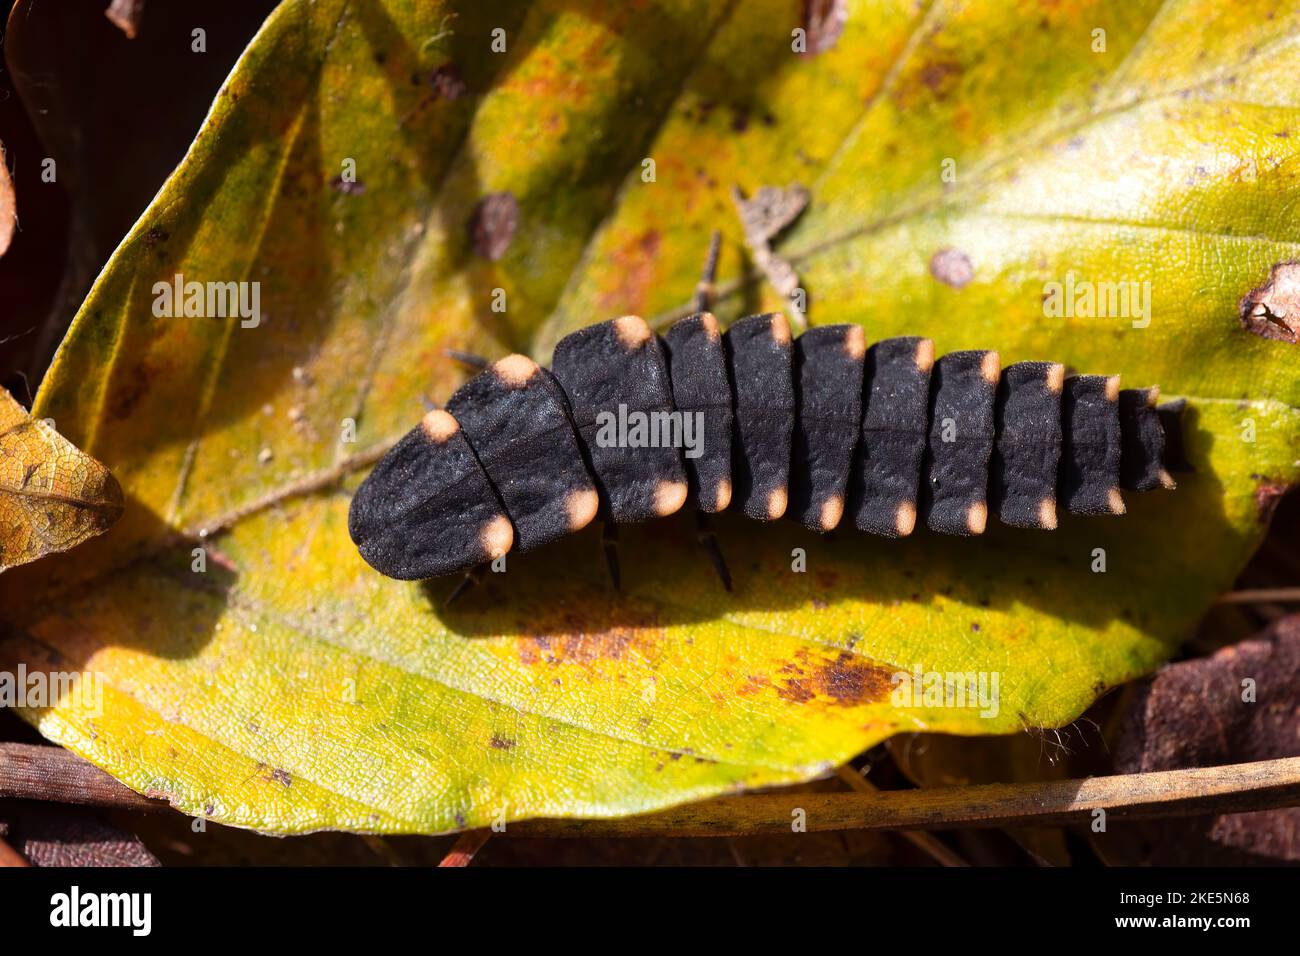 firefly larva on a green leaf in the sun. Nature photography. Copy space. Stock Photo